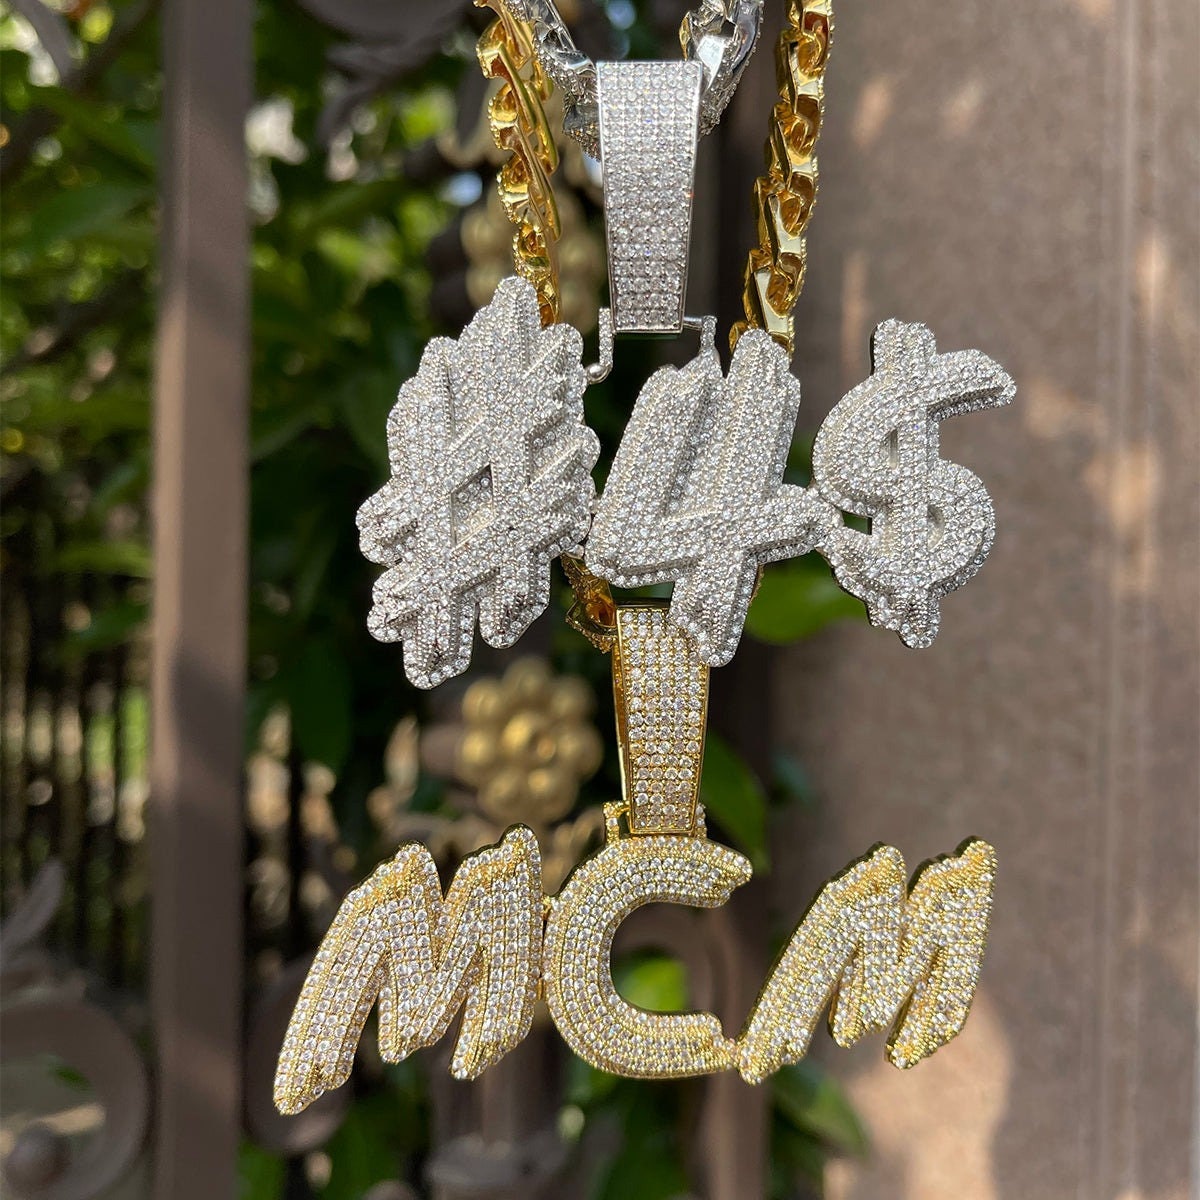 Iced Out Single Plated Nameplate Necklace Scarlett 